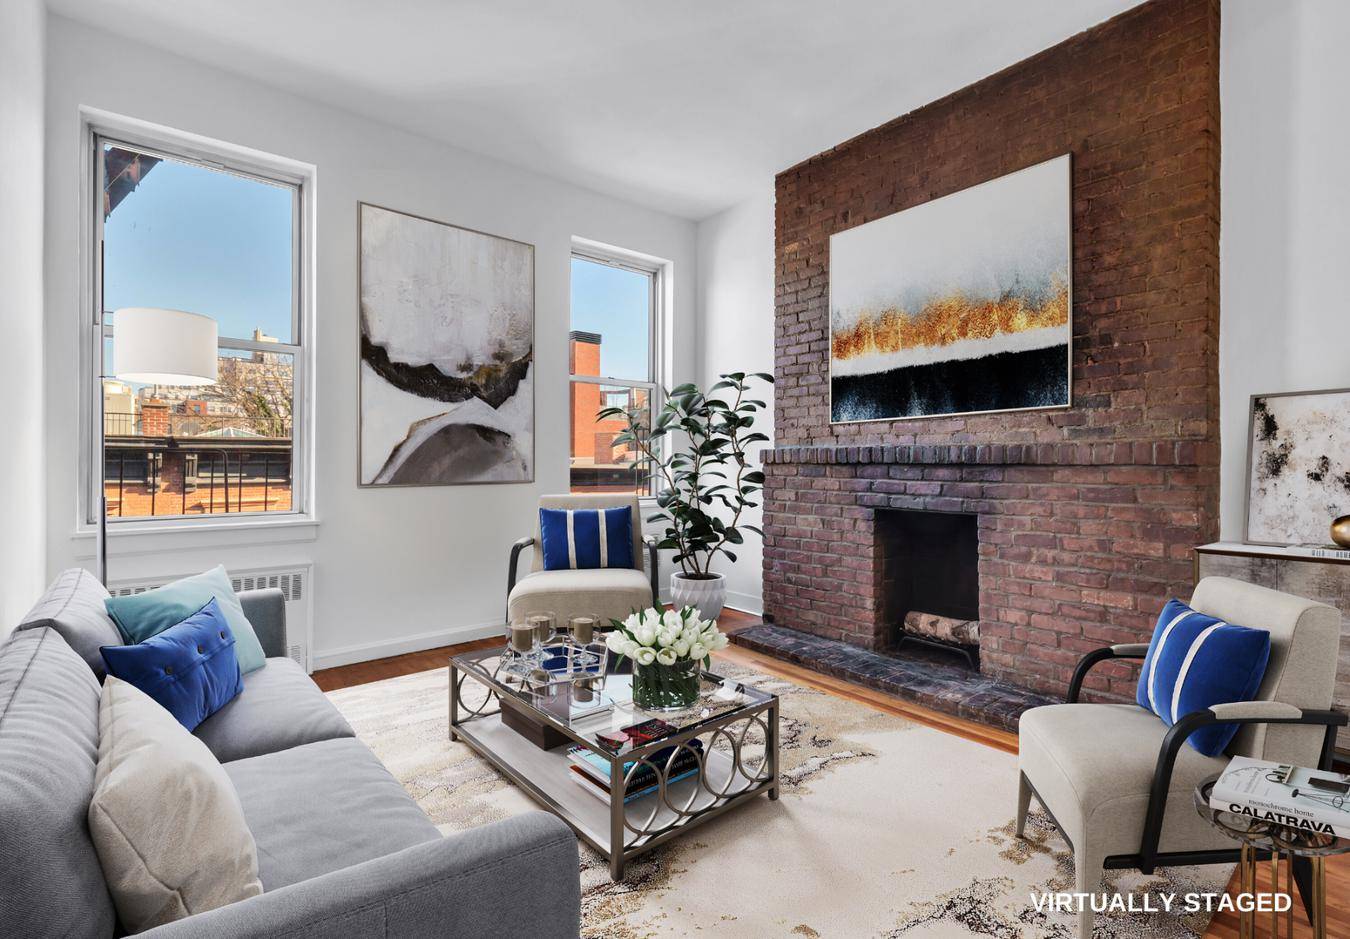 This unique, one bedroom, with approx 10 foot ceilings, one and a half bath duplex home boasts an unbelievably prime West Village location on idyllic West 4th Street, between Charles ...